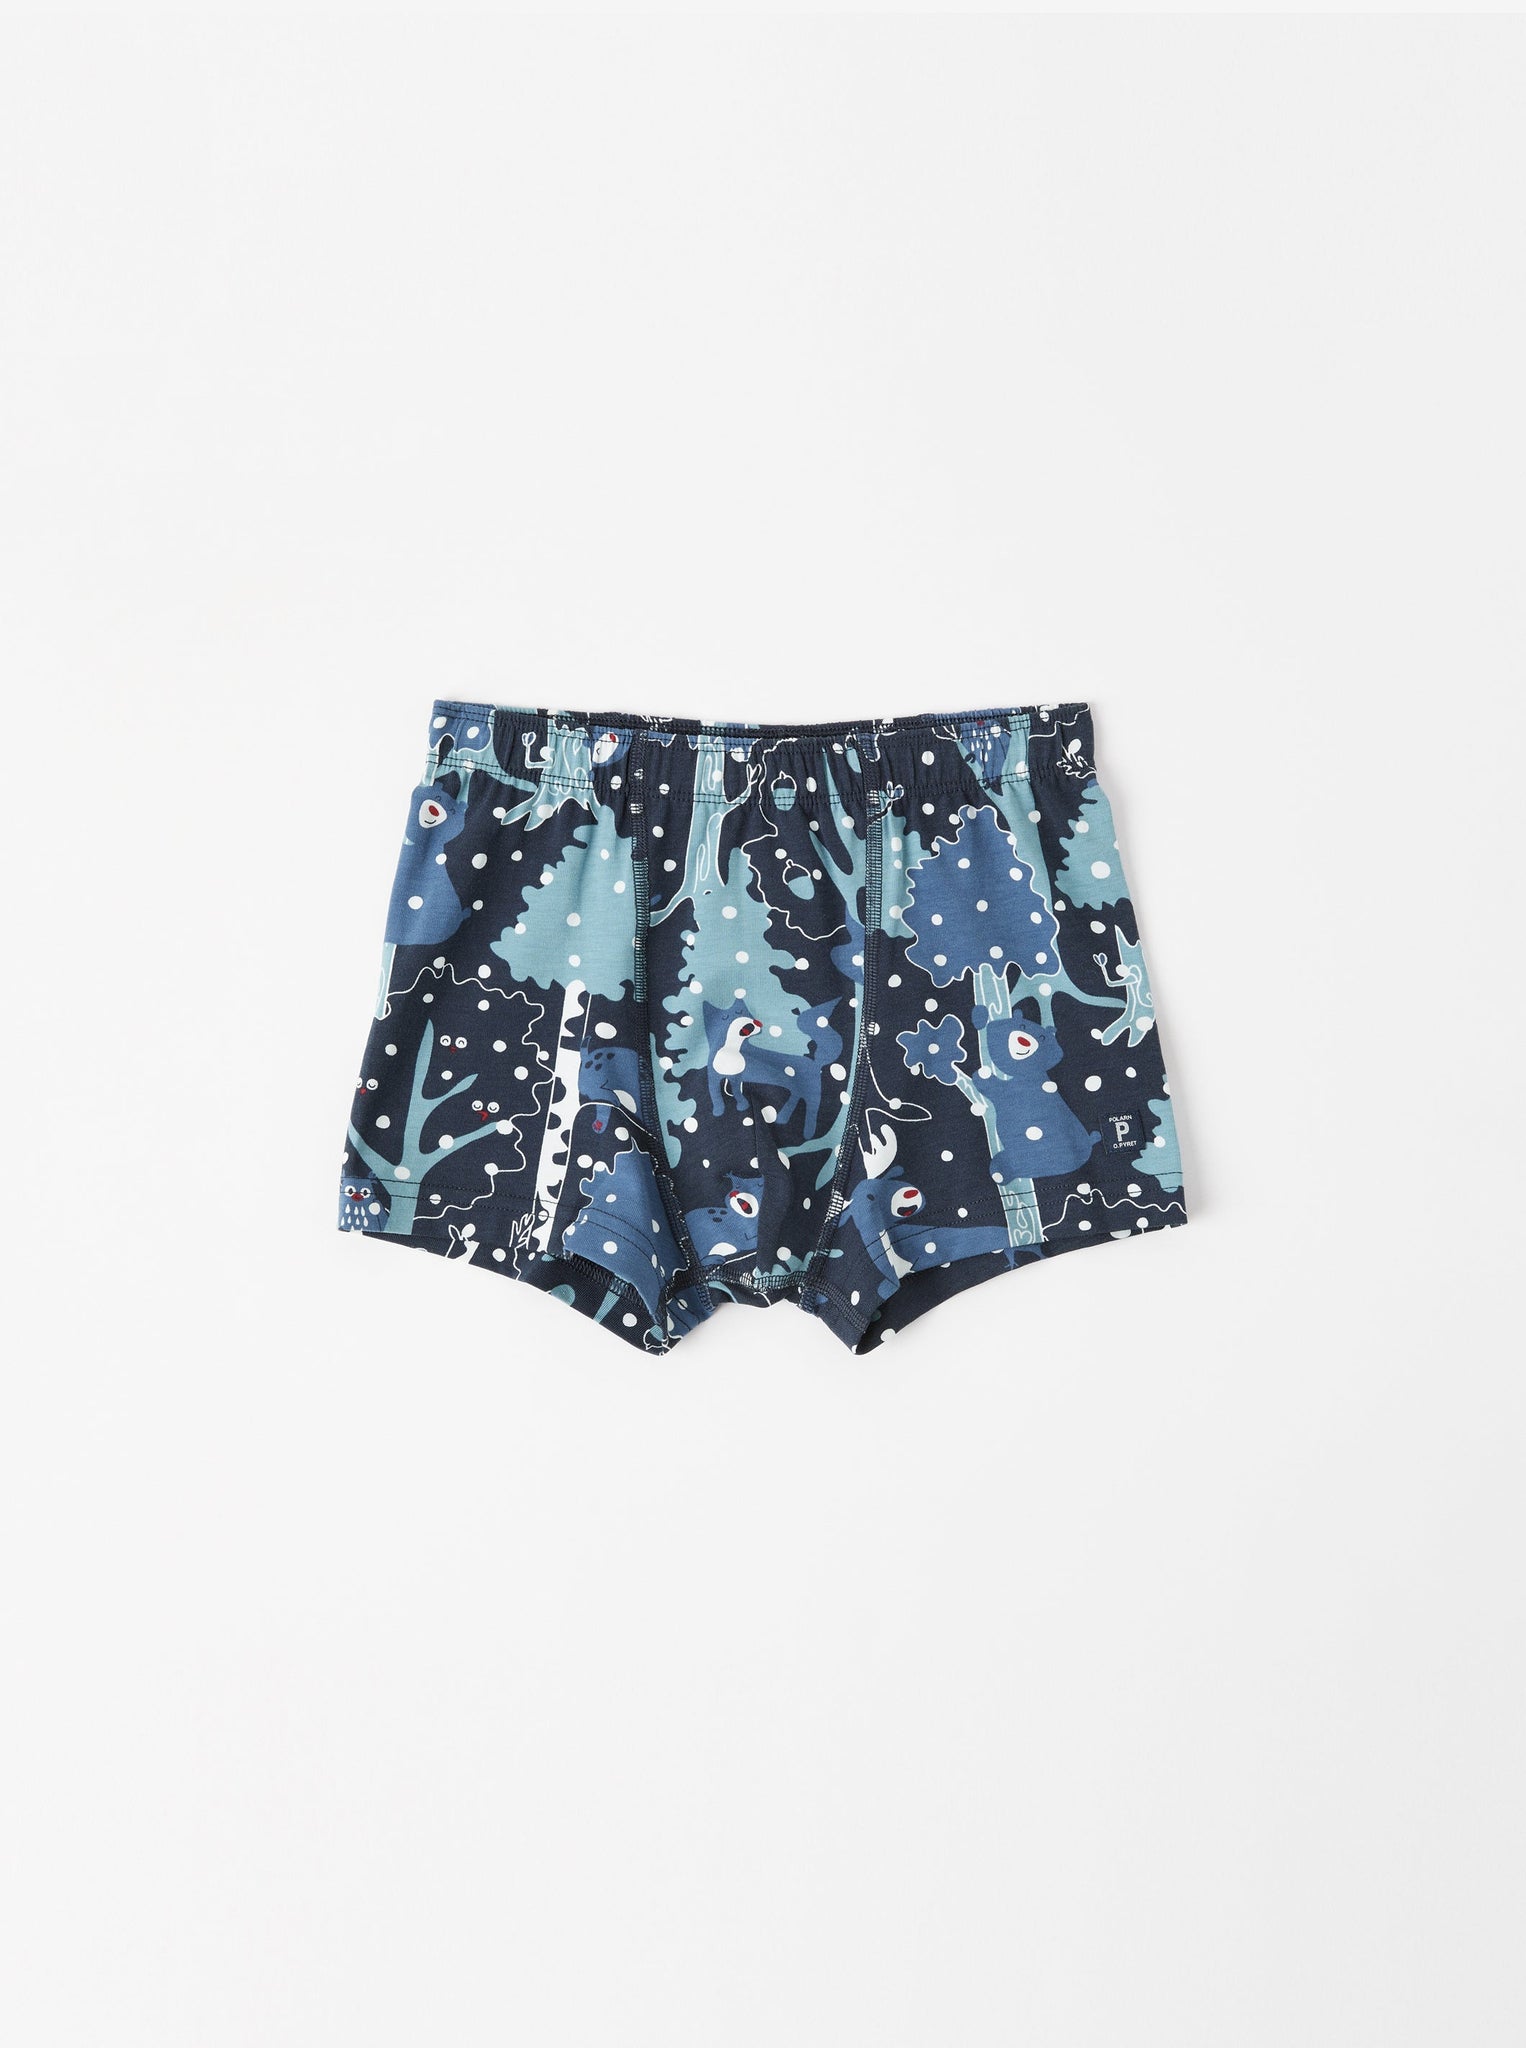 Organic Cotton Blue Boys Boxers from the Polarn O. Pyret kidswear collection. Clothes made using sustainably sourced materials.